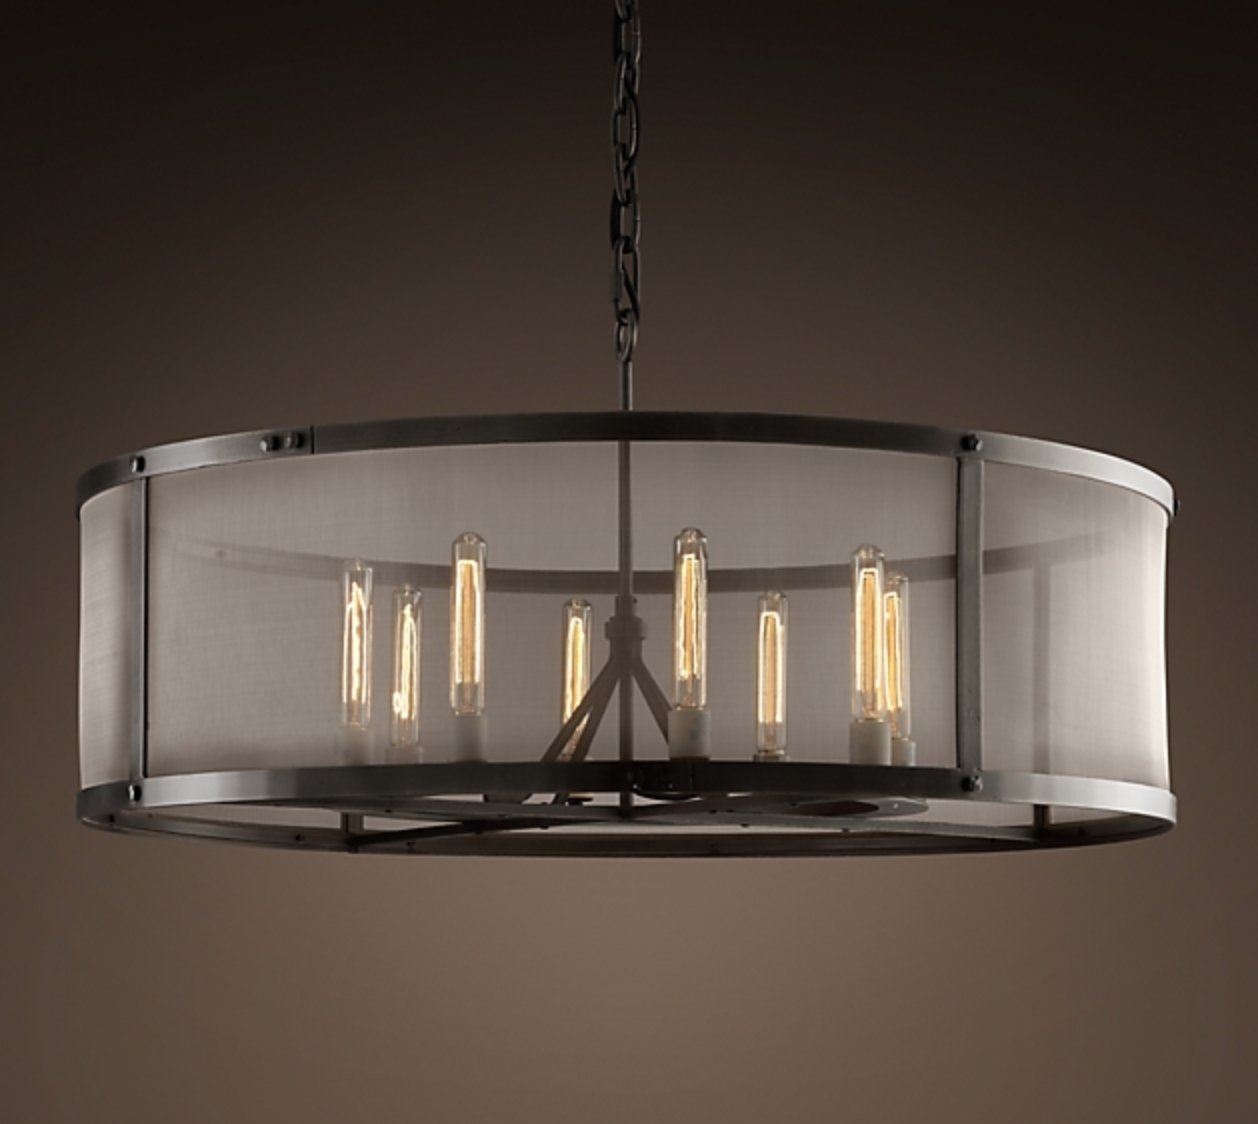 RIVETED MESH ROUND CHANDELIER 40" - Image 0